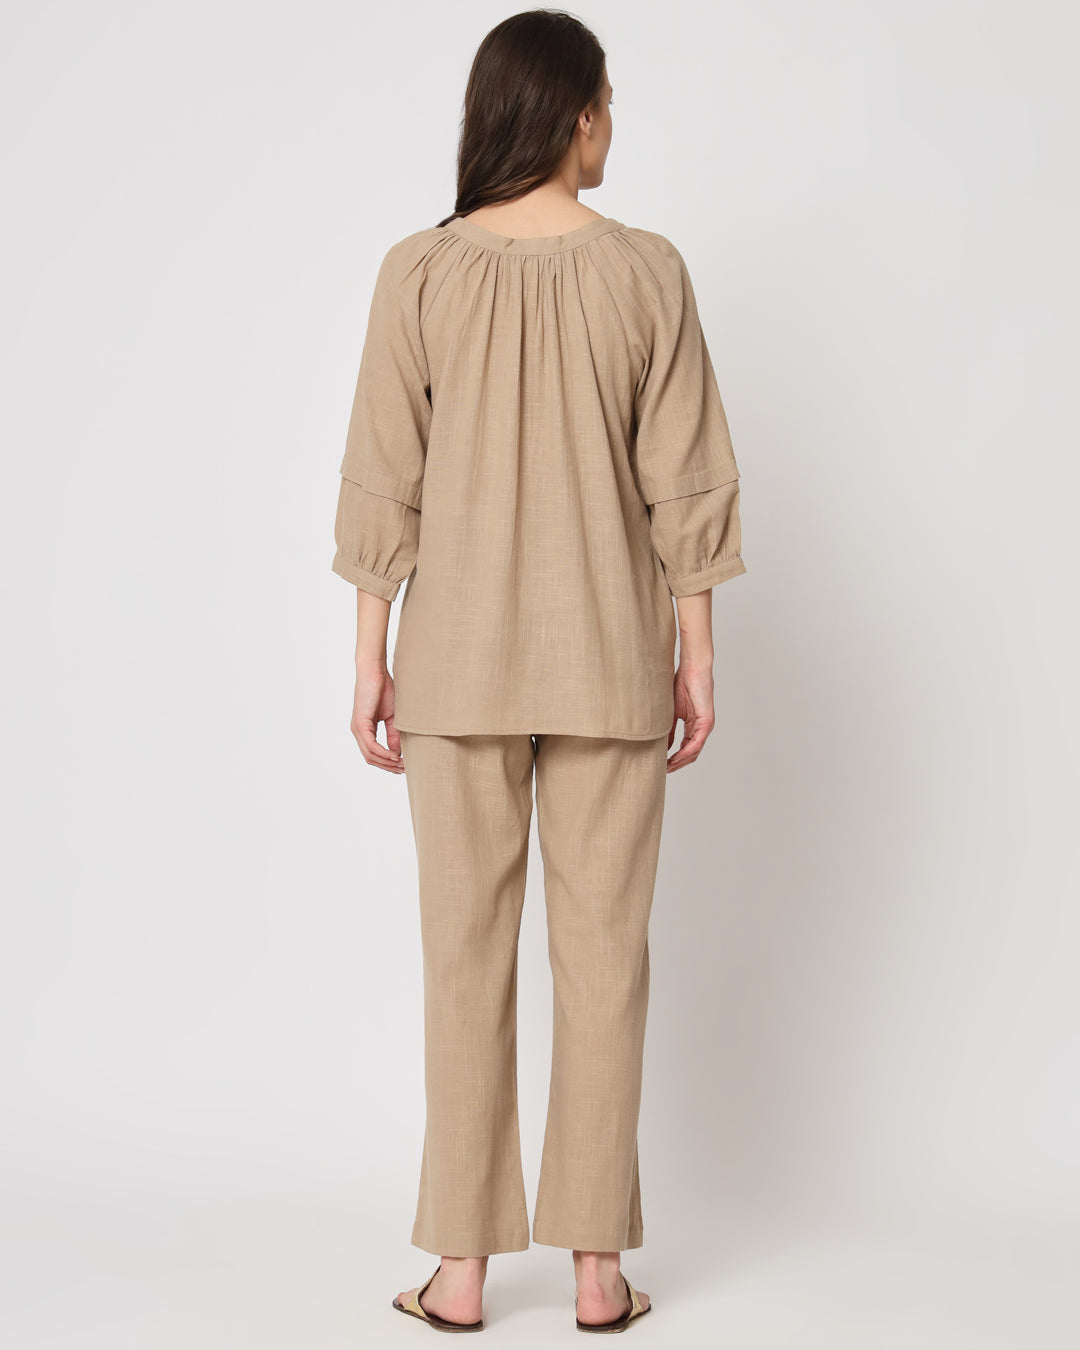 Day In Beige Button Neck Solid Top (Without Bottoms)